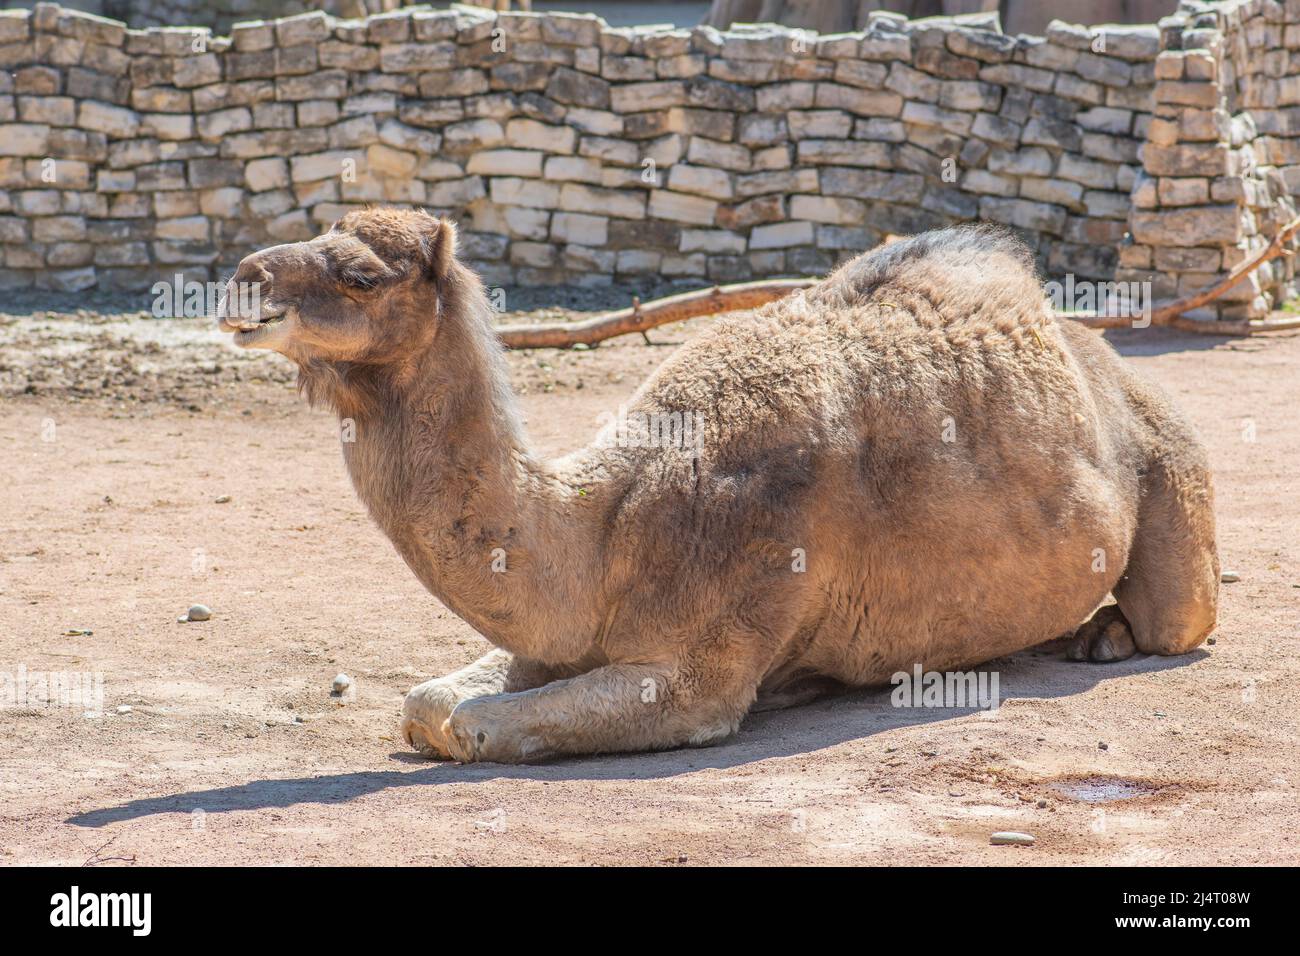 Dromedary, dromedary camel, Arabian camel or one-humped camel, large even-toed ungulate, of the genus Camelus, with one hump on its back Stock Photo